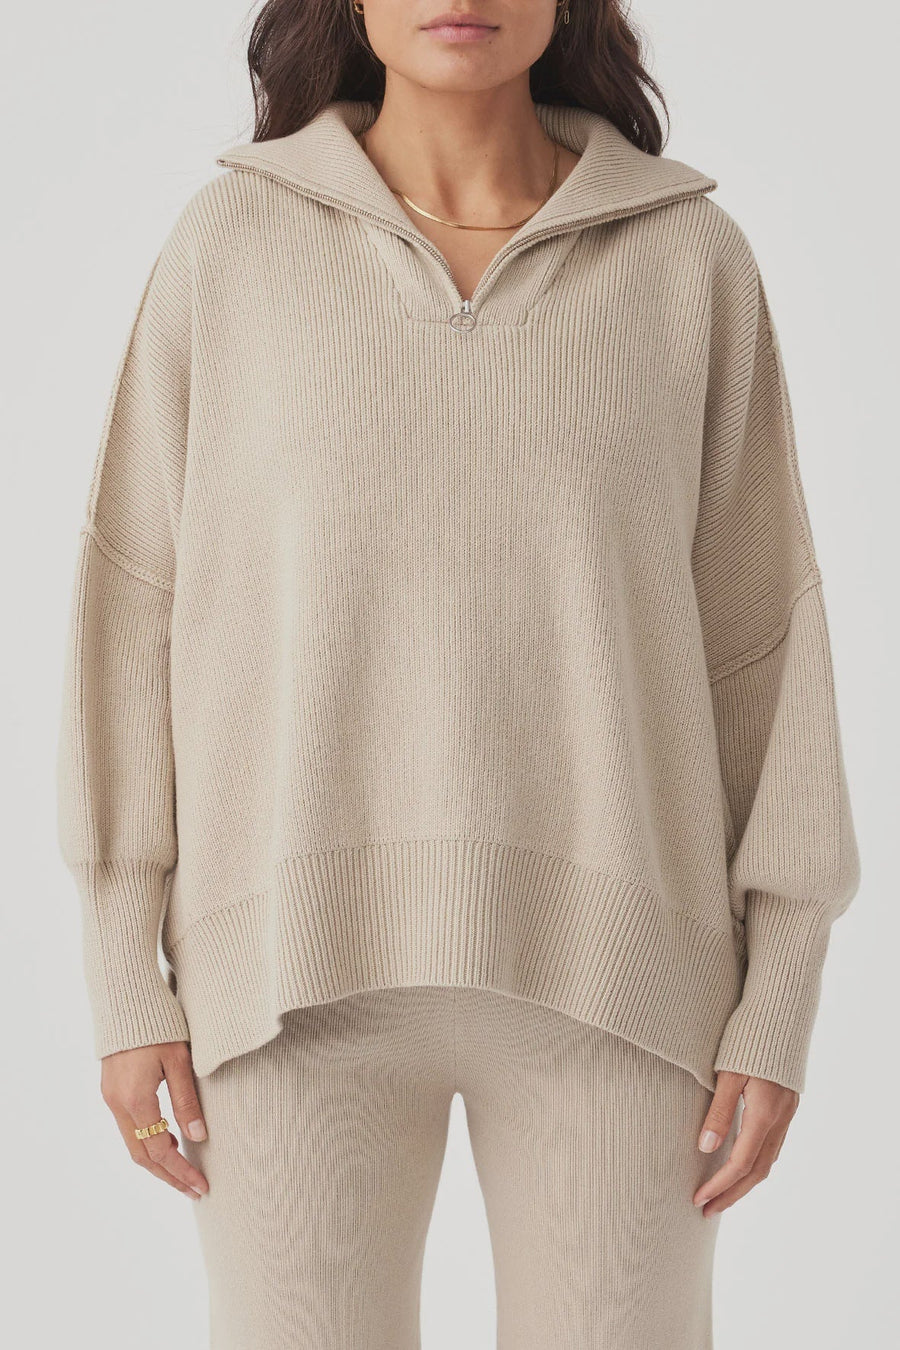 London Sweater Taupe - Kohl and Soda